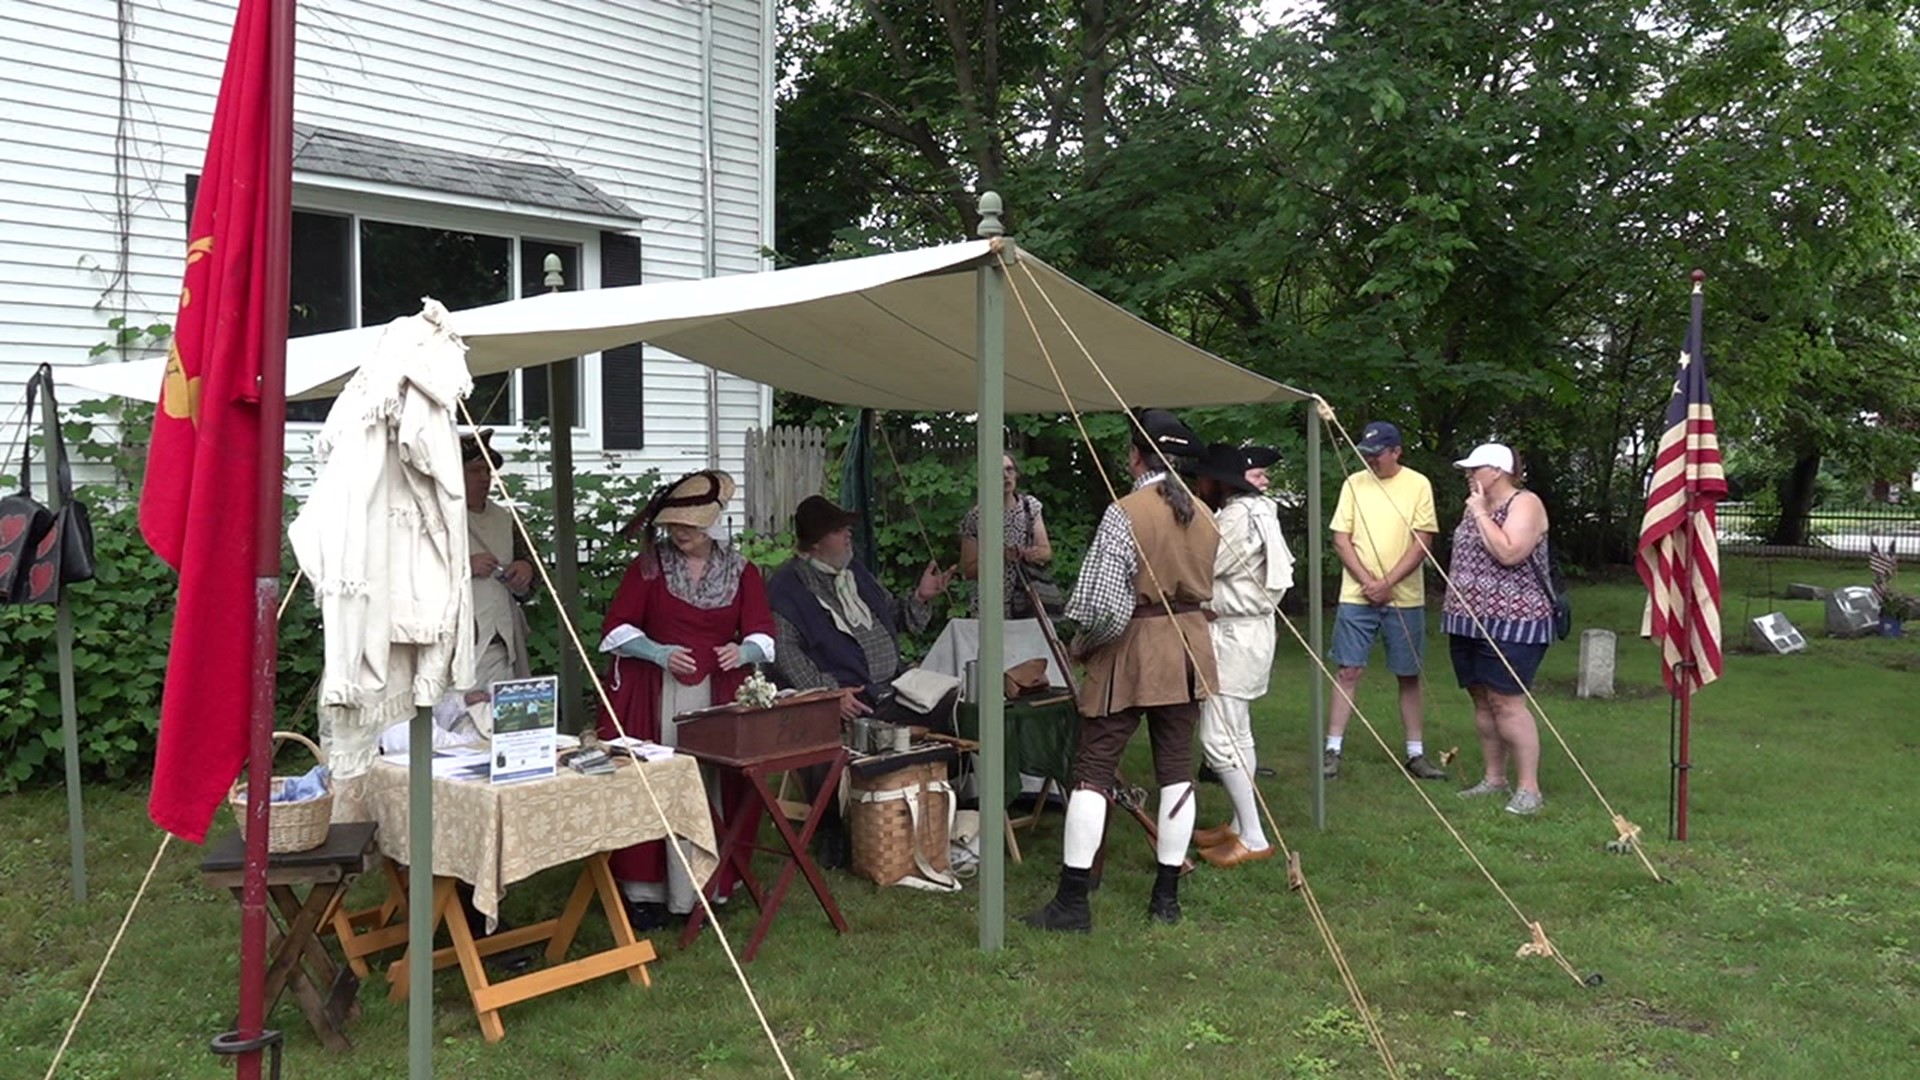 Folks recognized the area's involvement in the Revolutionary War and honored those who lost their lives in a battle at the "First to Fall" event.